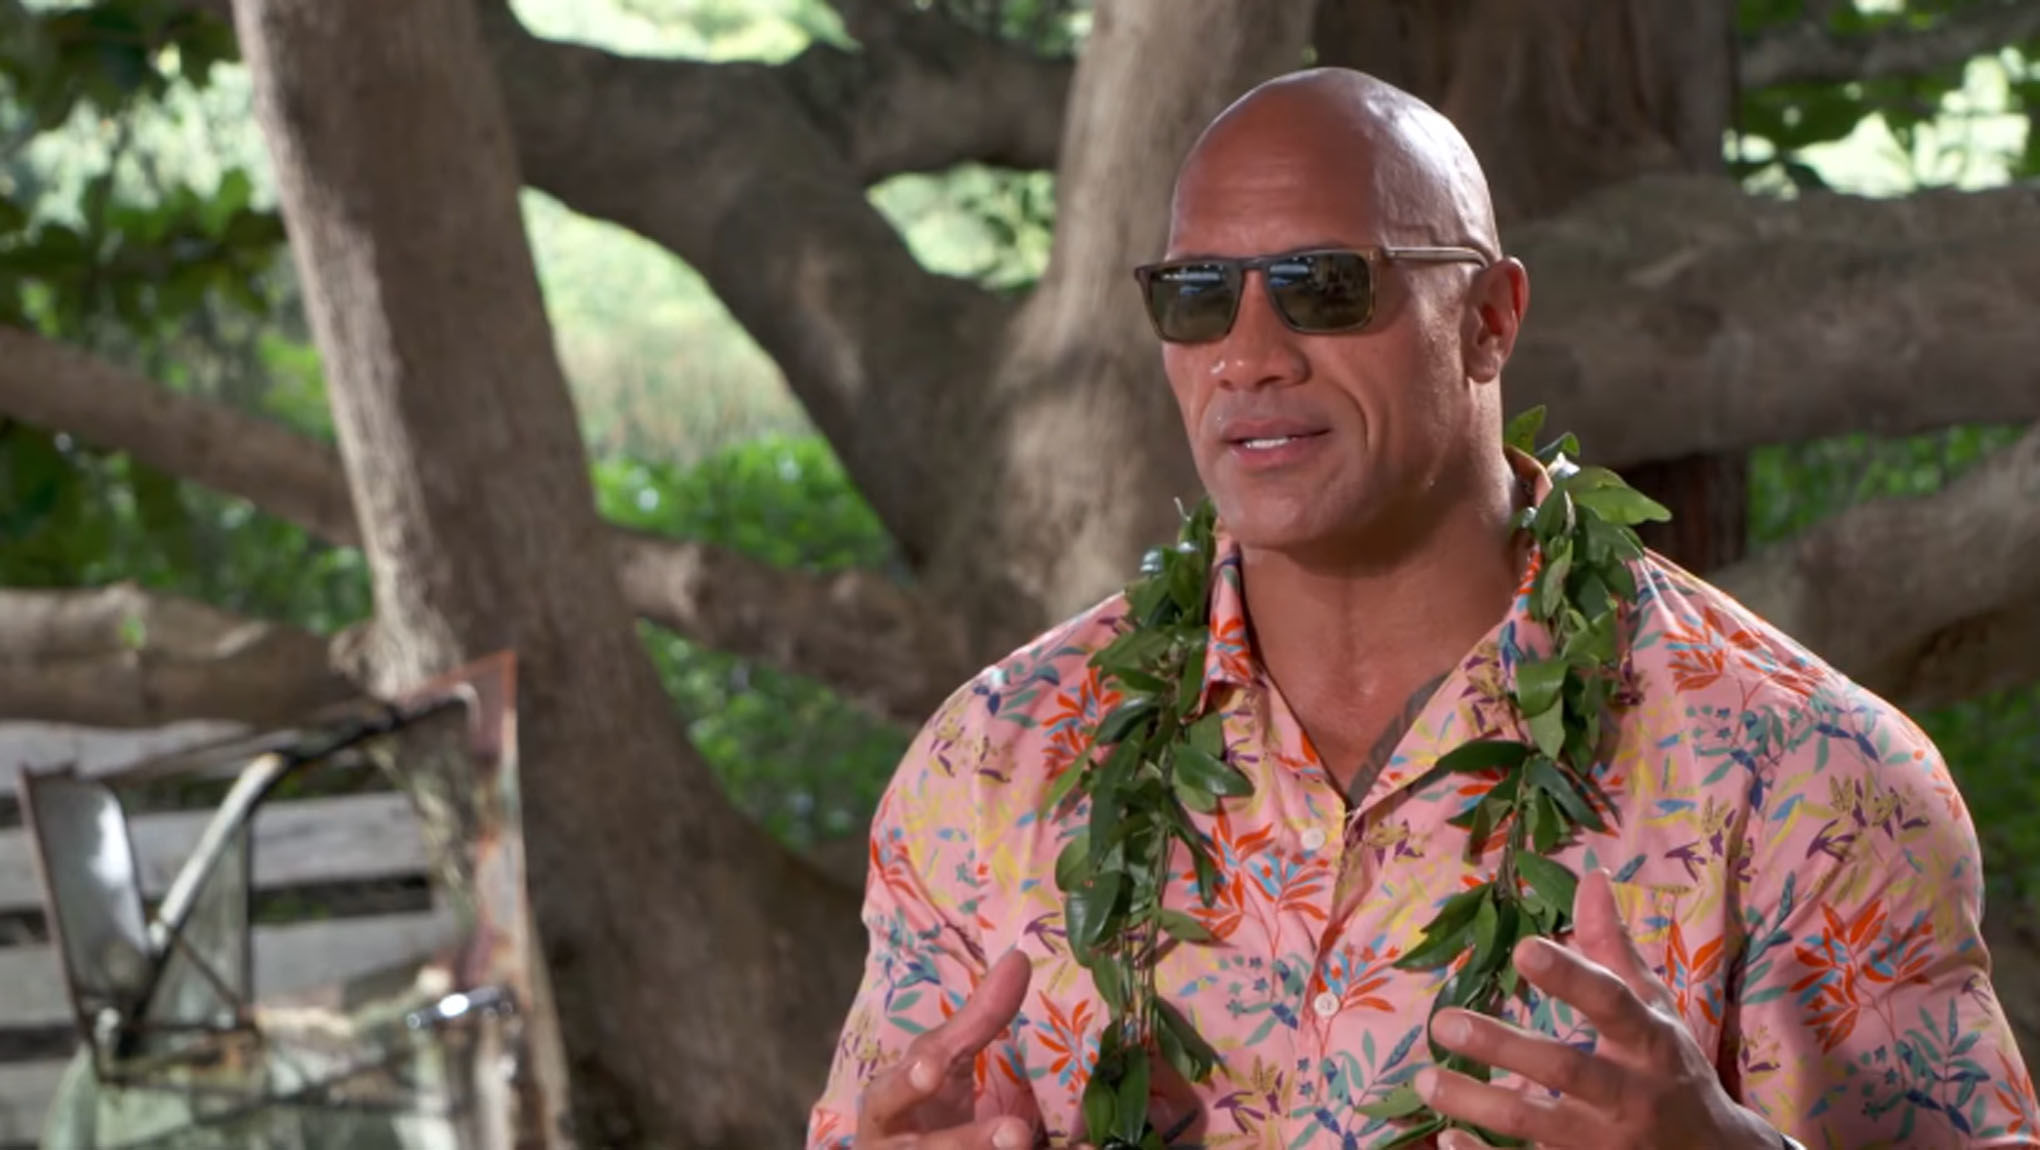 Dwayne Johnson brings Samoan heritage to Fast and Furious spin-off